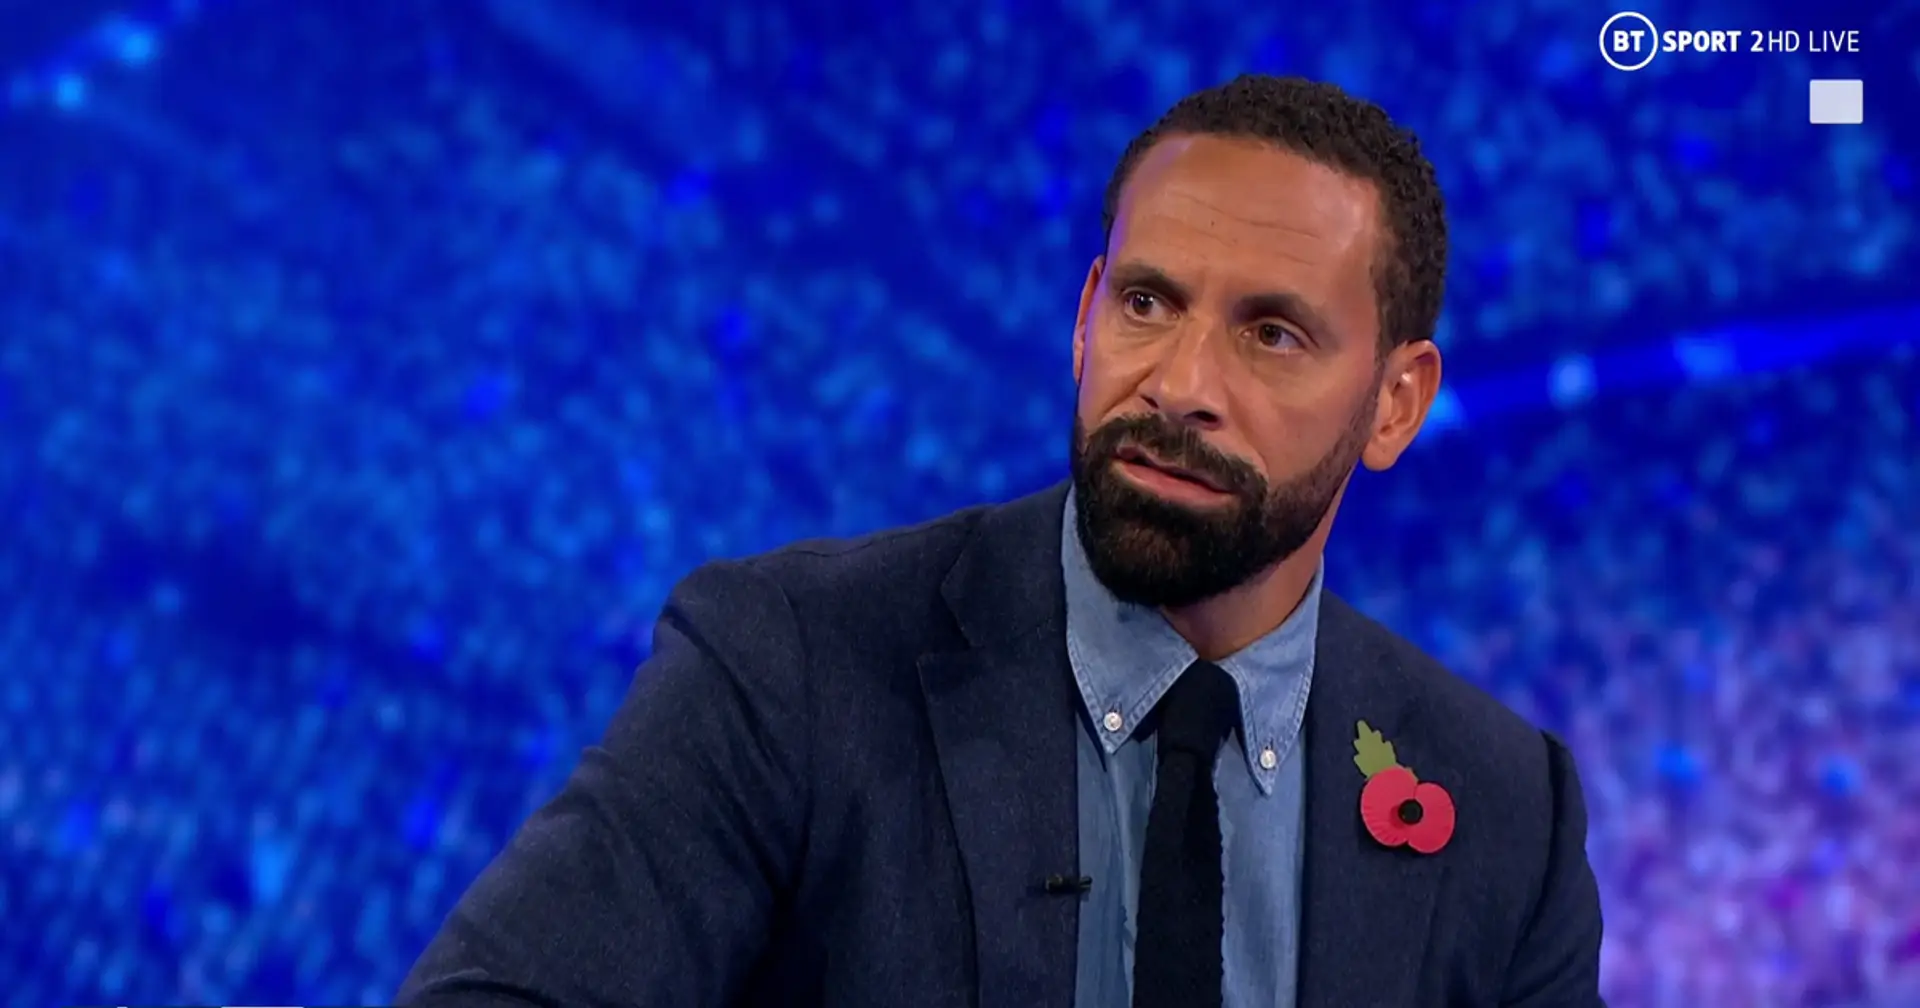 Rio Ferdinand singles out Bruno Fernandes after Everton clash: 'Man United need more of that type'